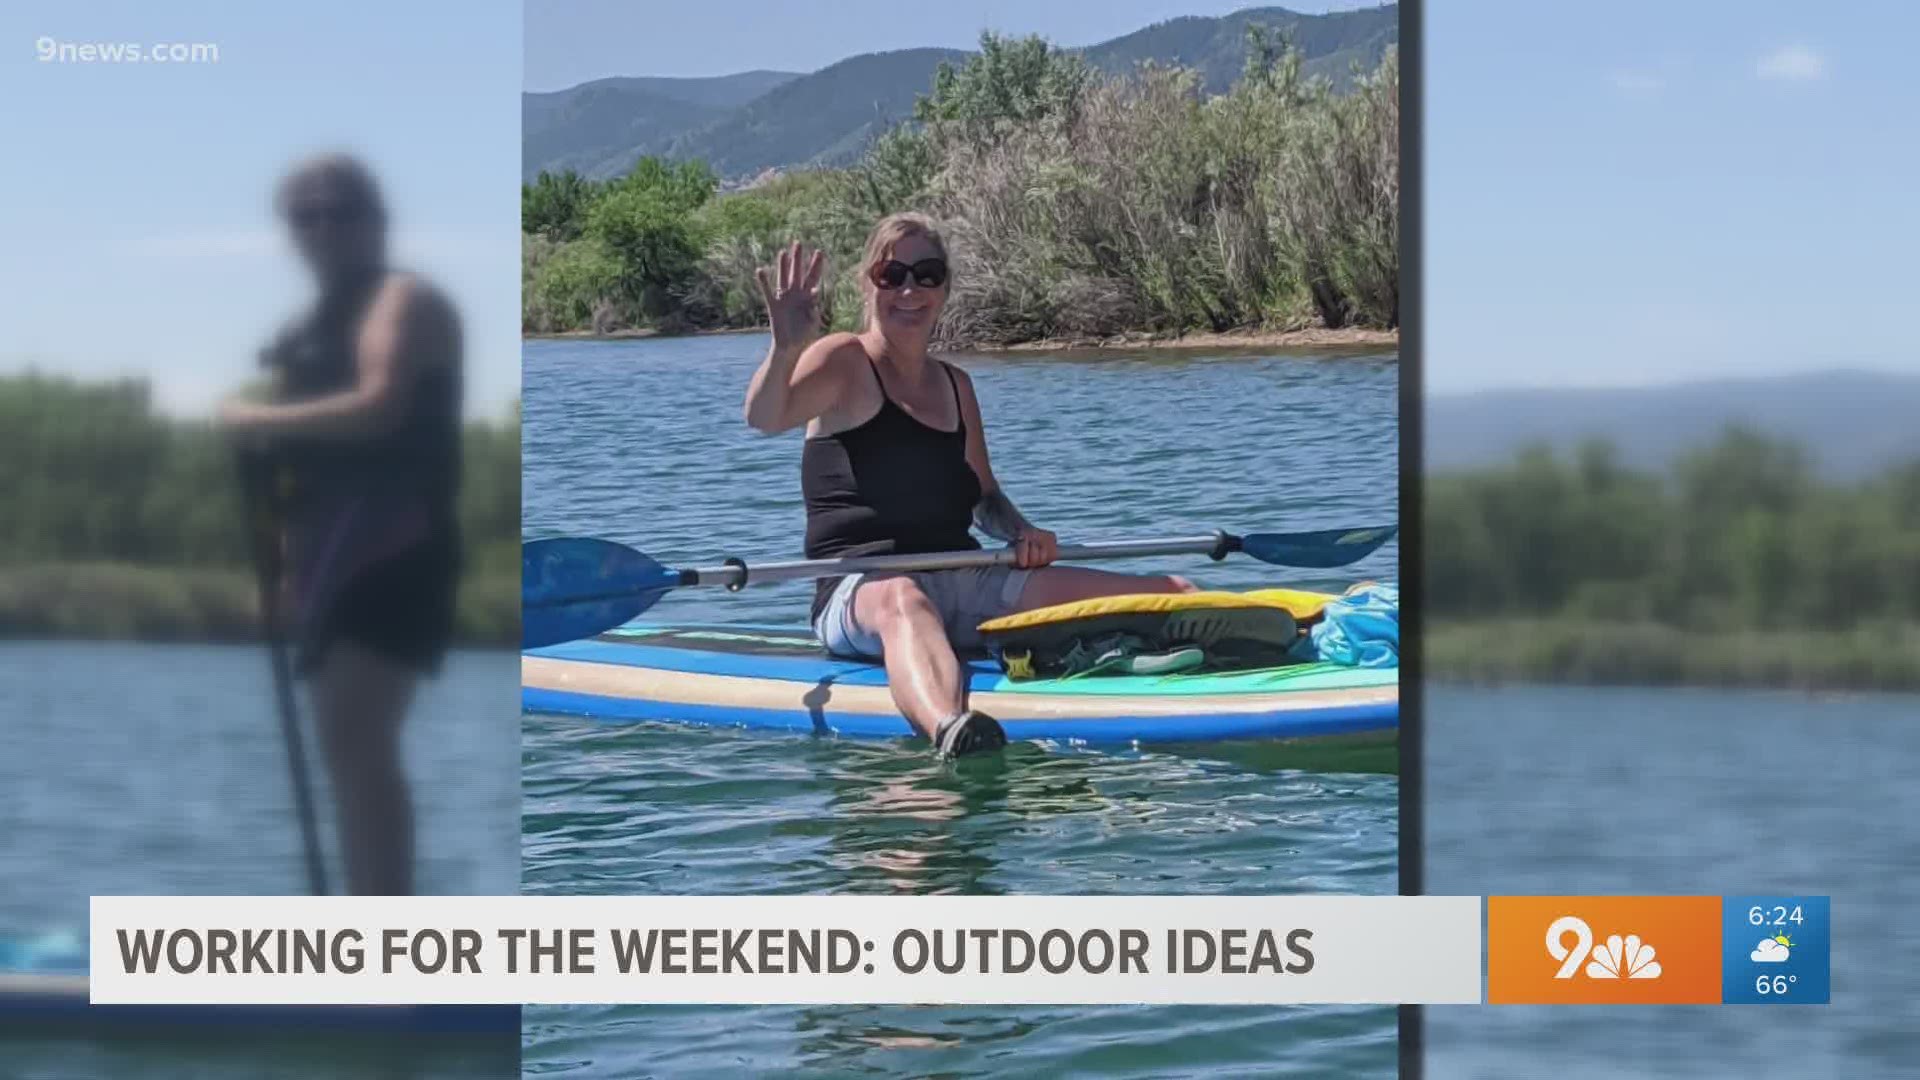 Liz and Ryan are back to recommend some fun things to do outside this weekend!